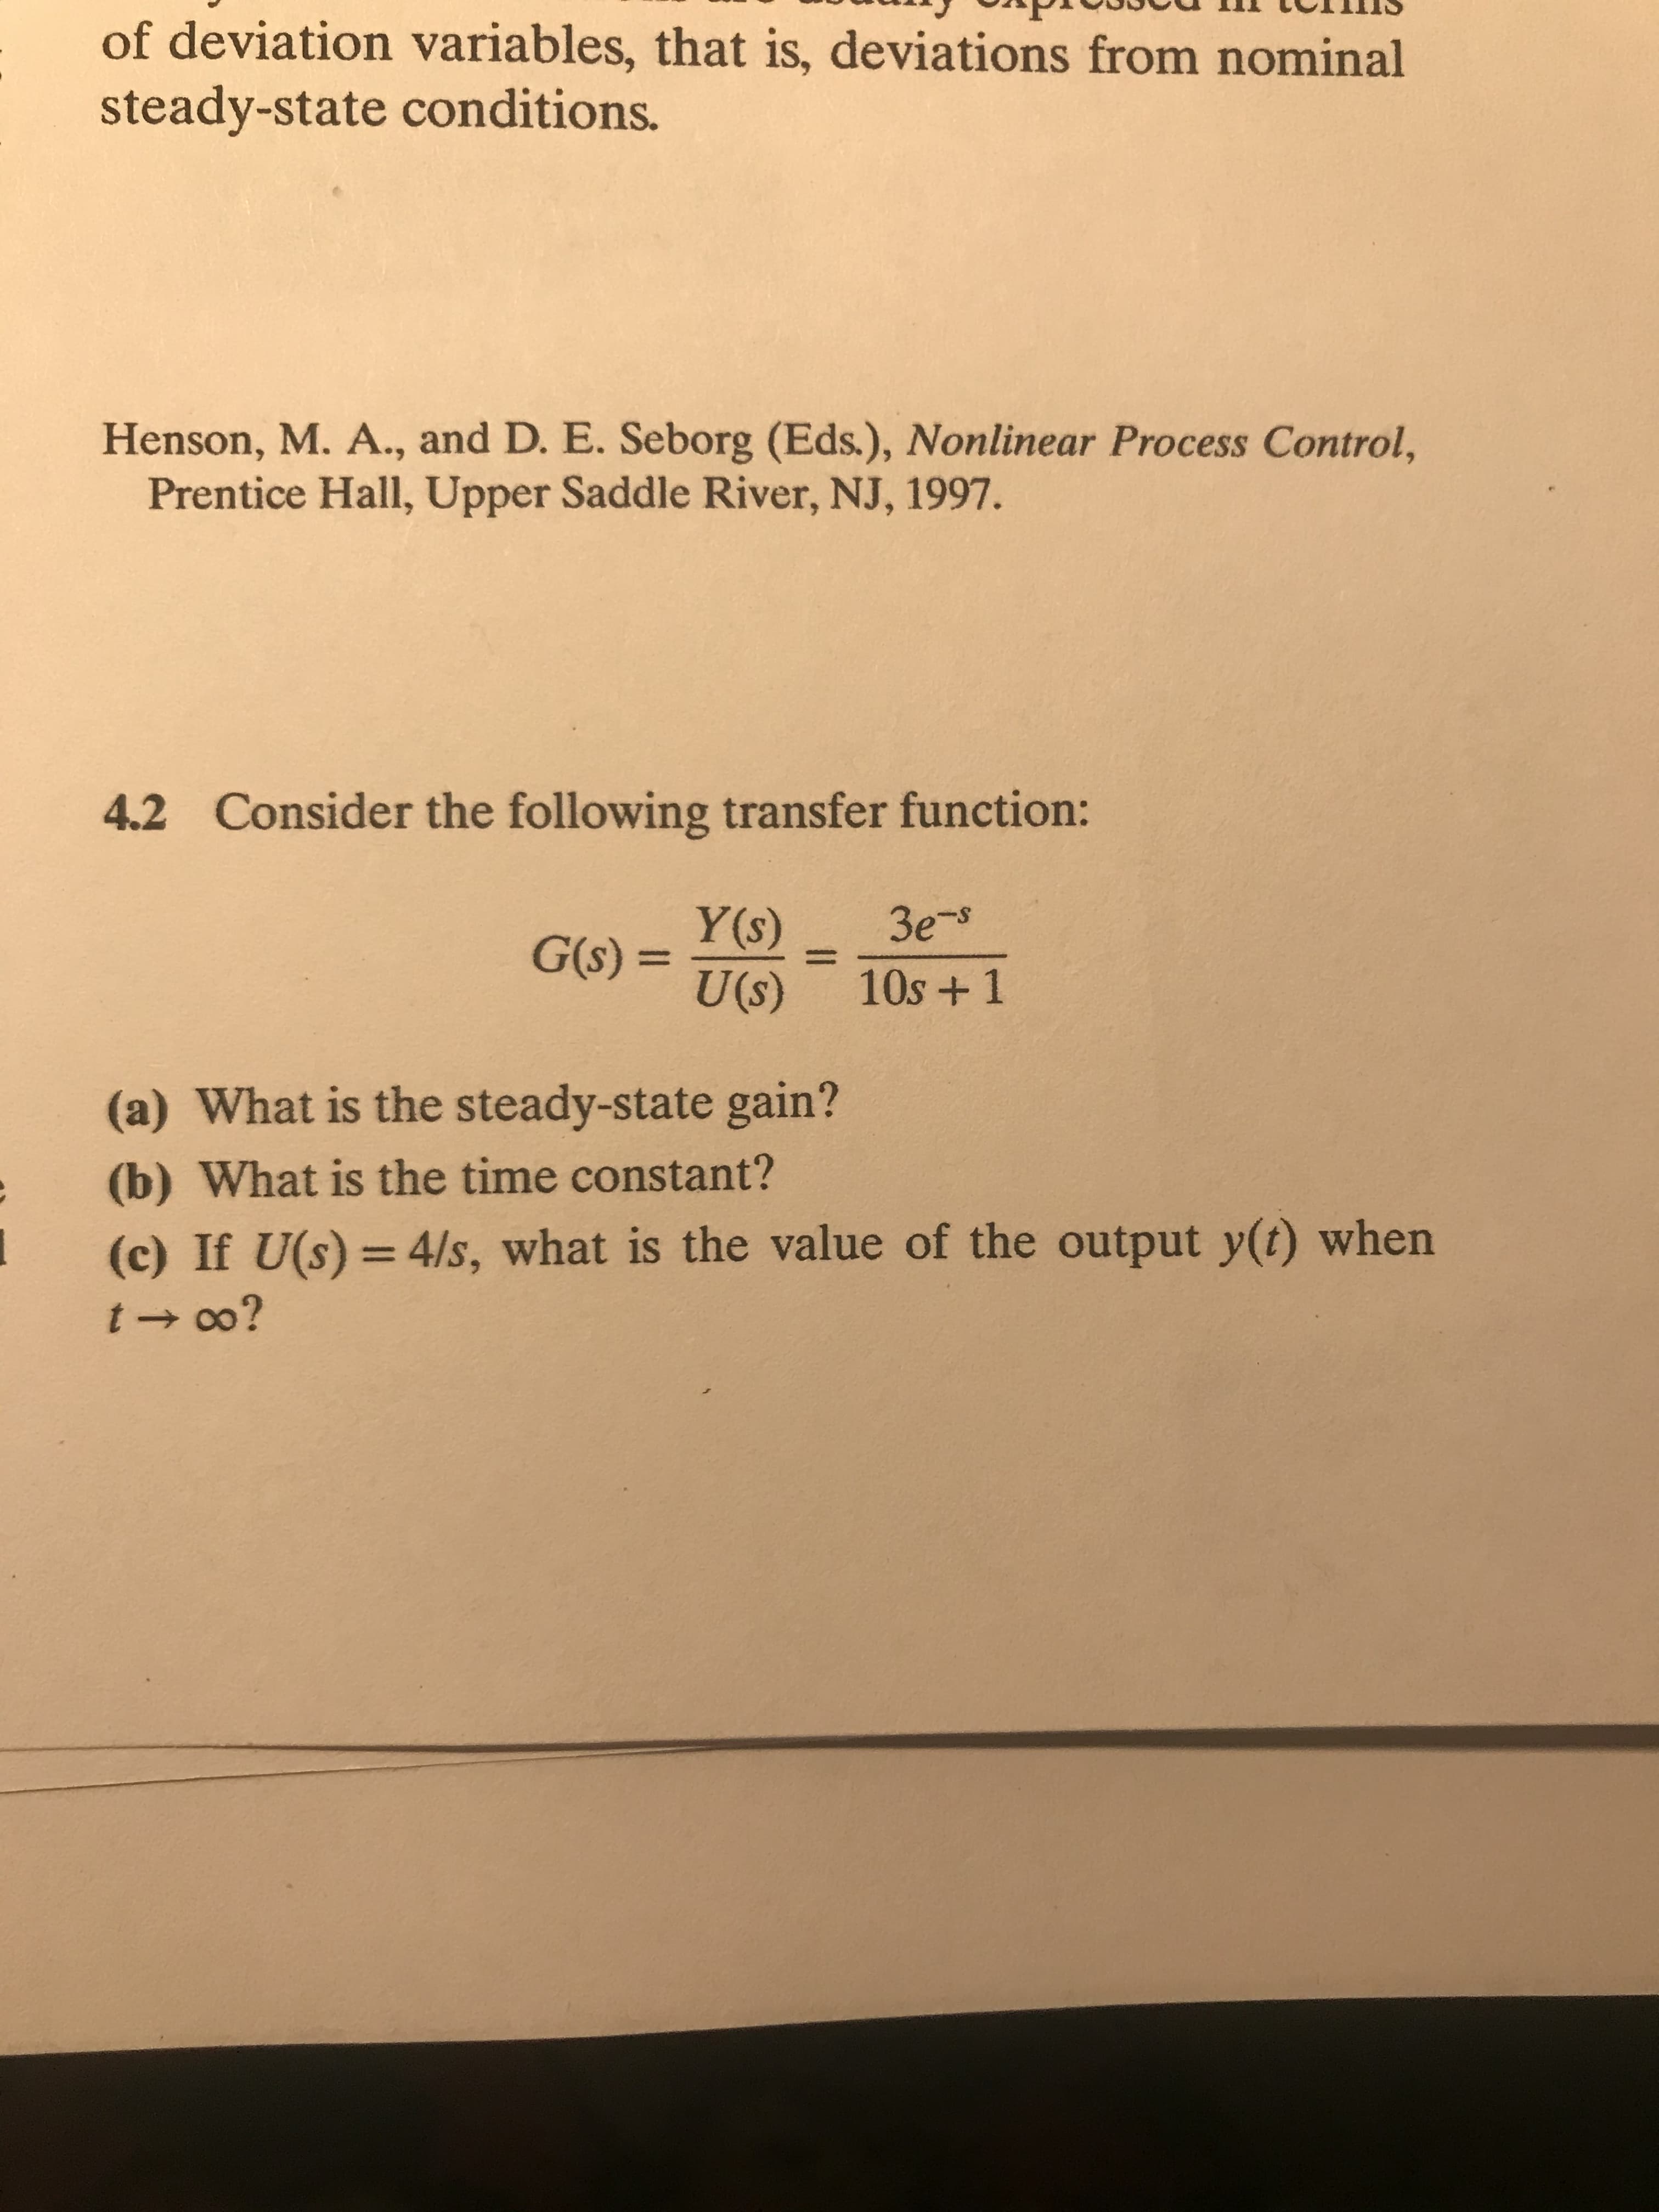 of deviation variables, that is, deviations from nominal
steady-state conditions.
Henson, M. A., and D. E. Seborg (Eds.), Nonlinear Process Control,
Prentice Hall, Upper Saddle River, NJ, 1997.
4.2 Consider the following transfer function:
Зе
Y(s)
G(s) =
U(s)
%3D
10s +1
(a) What is the steady-state gain?
(b) What is the time constant?
(c) If U(s) = 4/s, what is the value of the output y(t) when
%3D
t - 0o?
